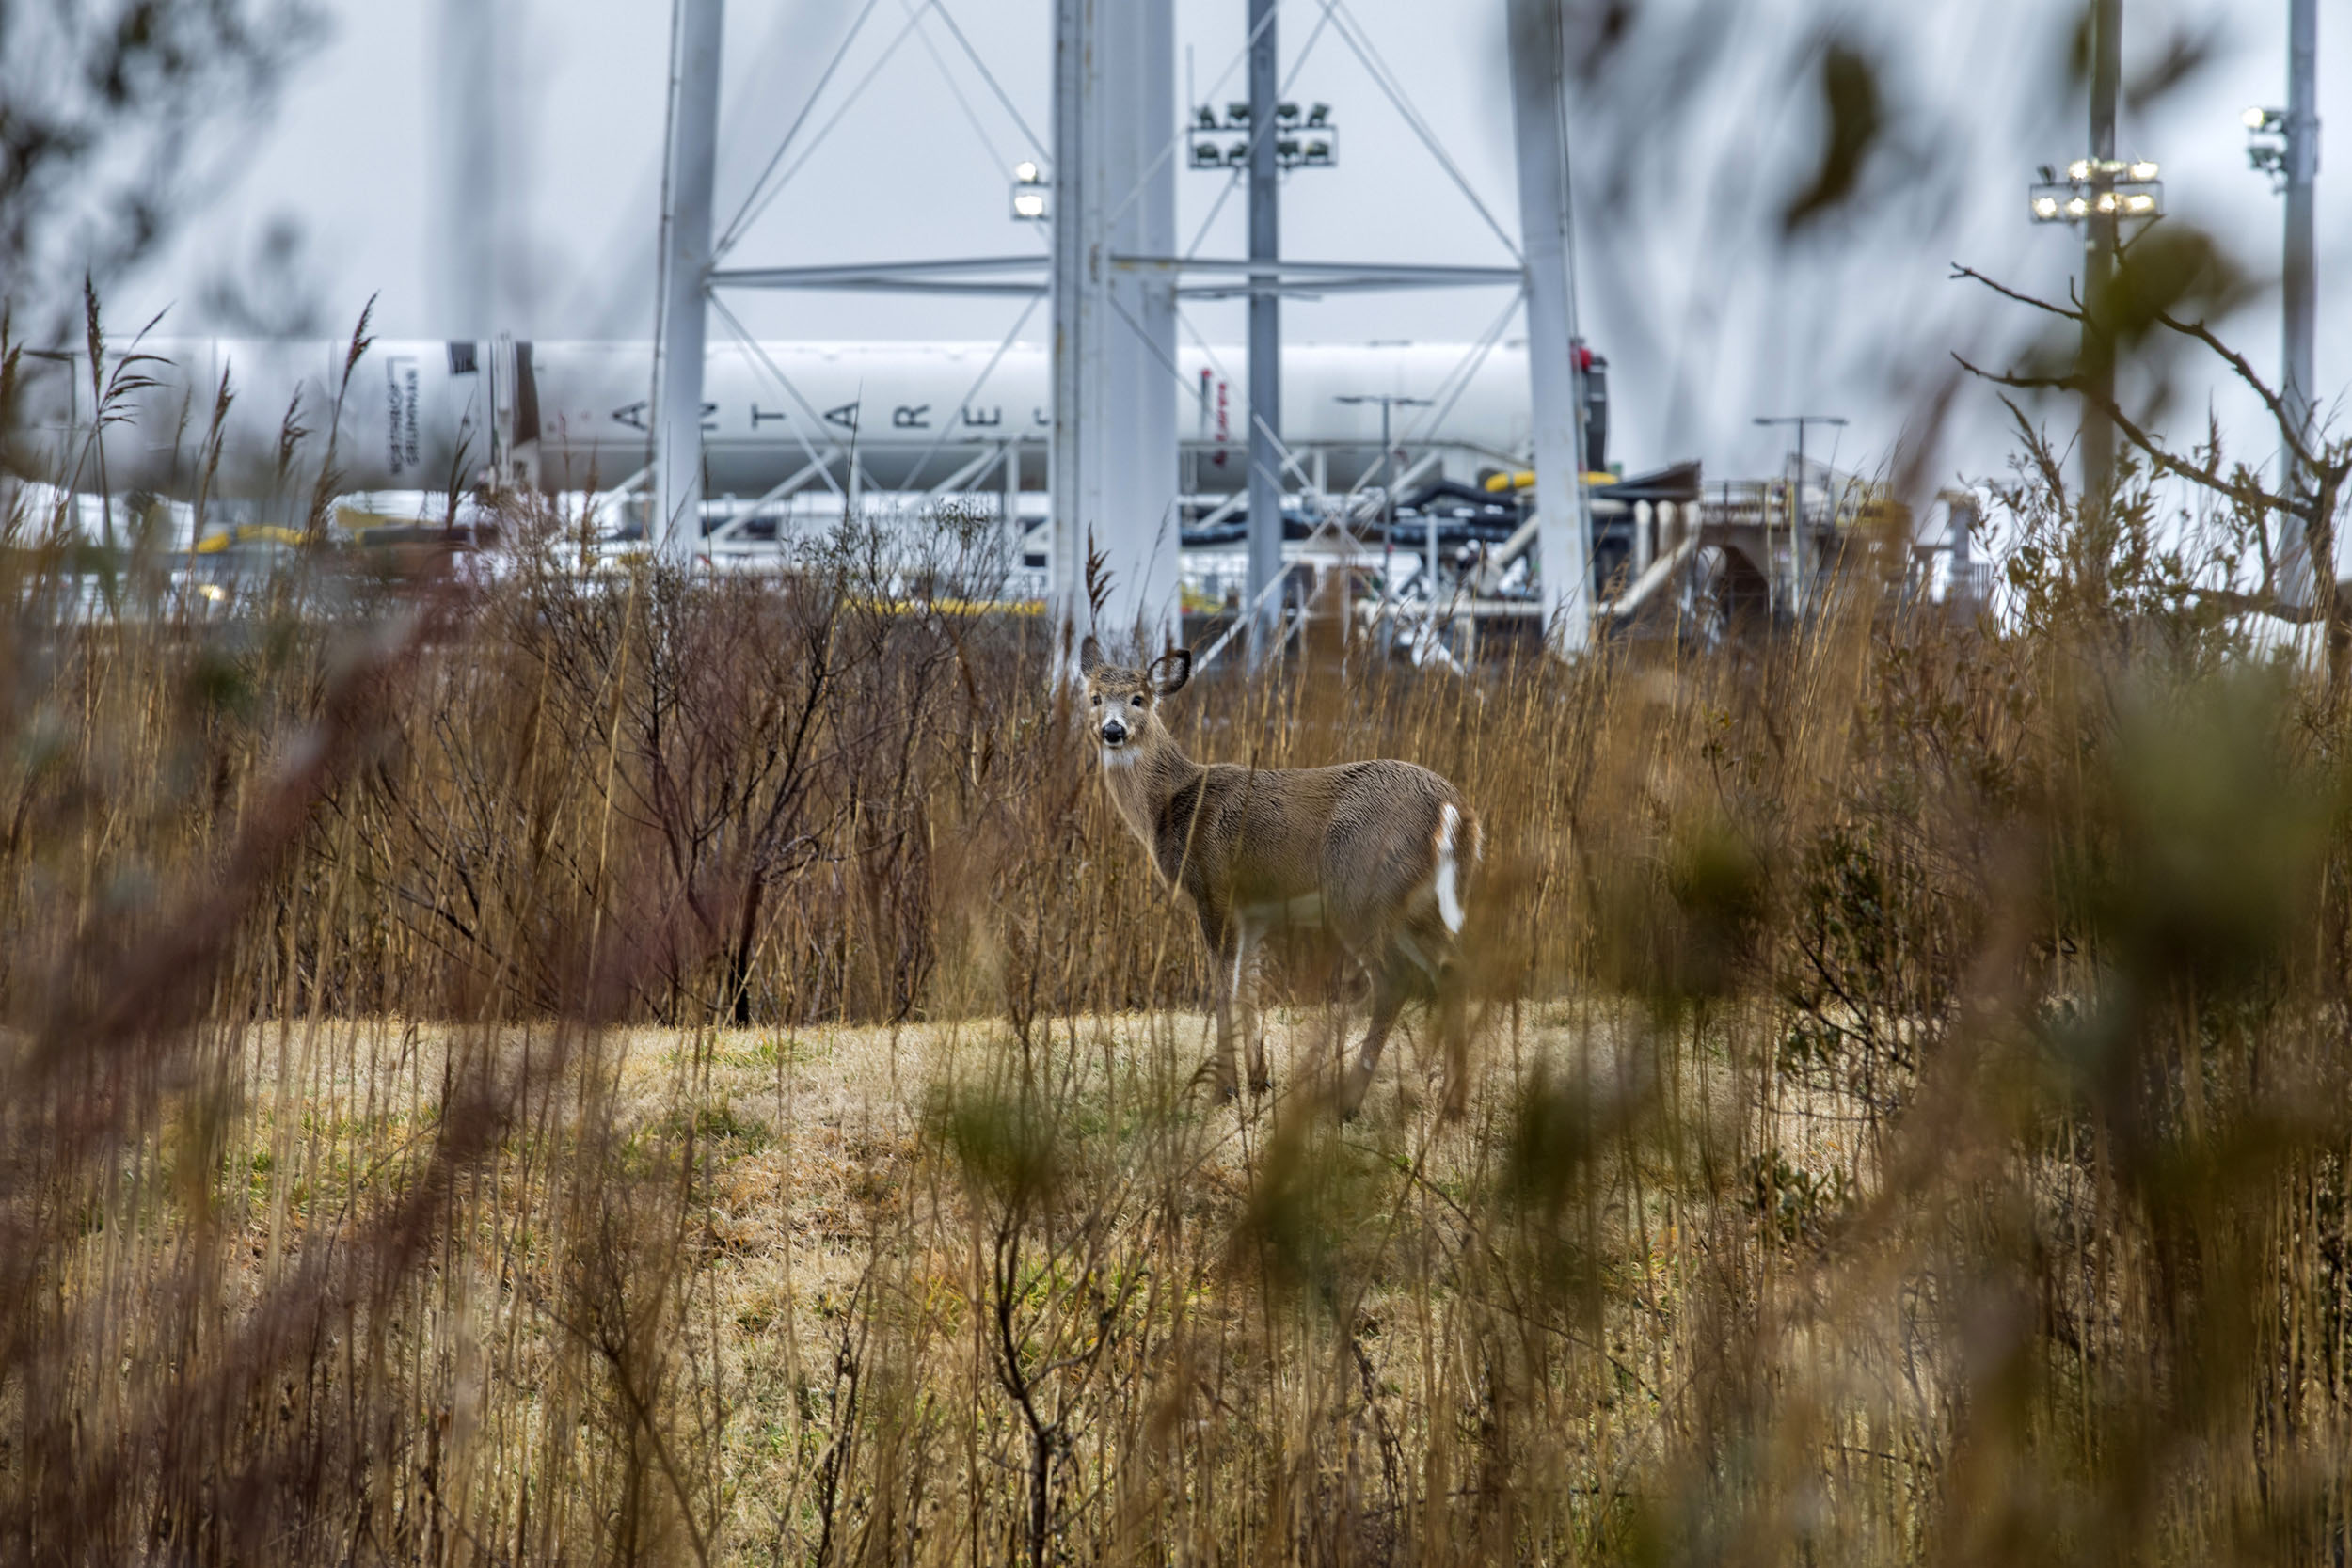 A deer standing in a field in front of a rocket on a launch pad